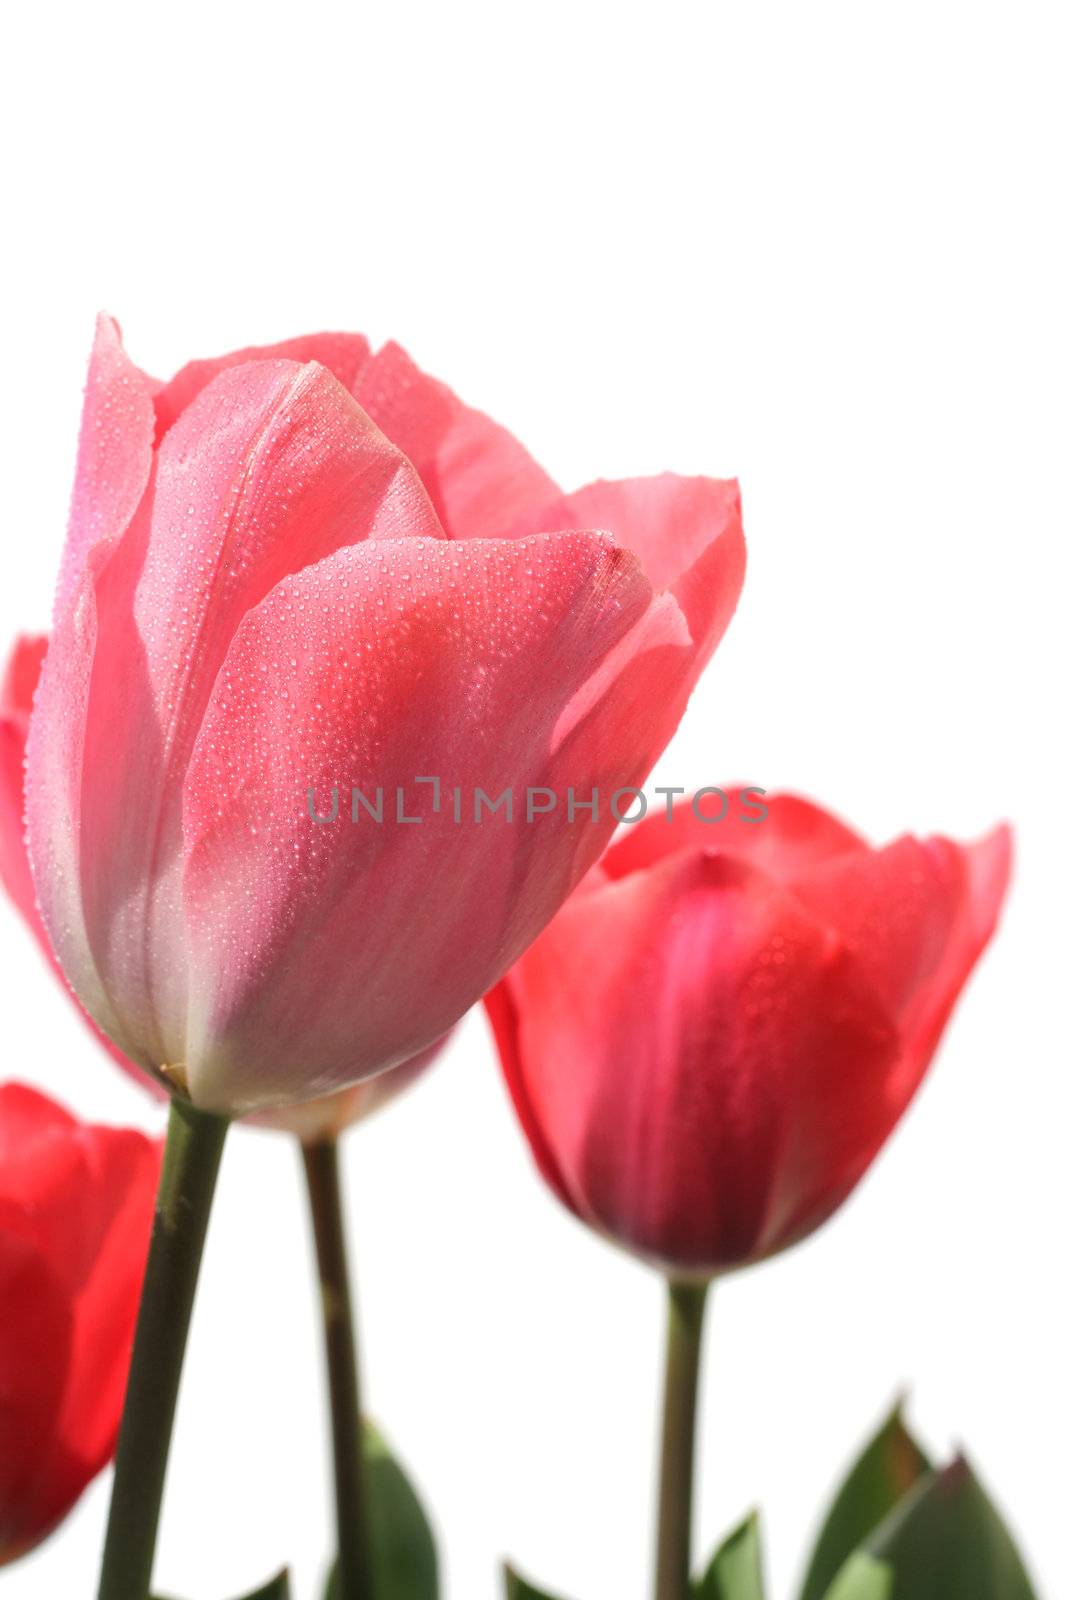 pink fresh spring tulips flowers with dew drops isolated on a white background